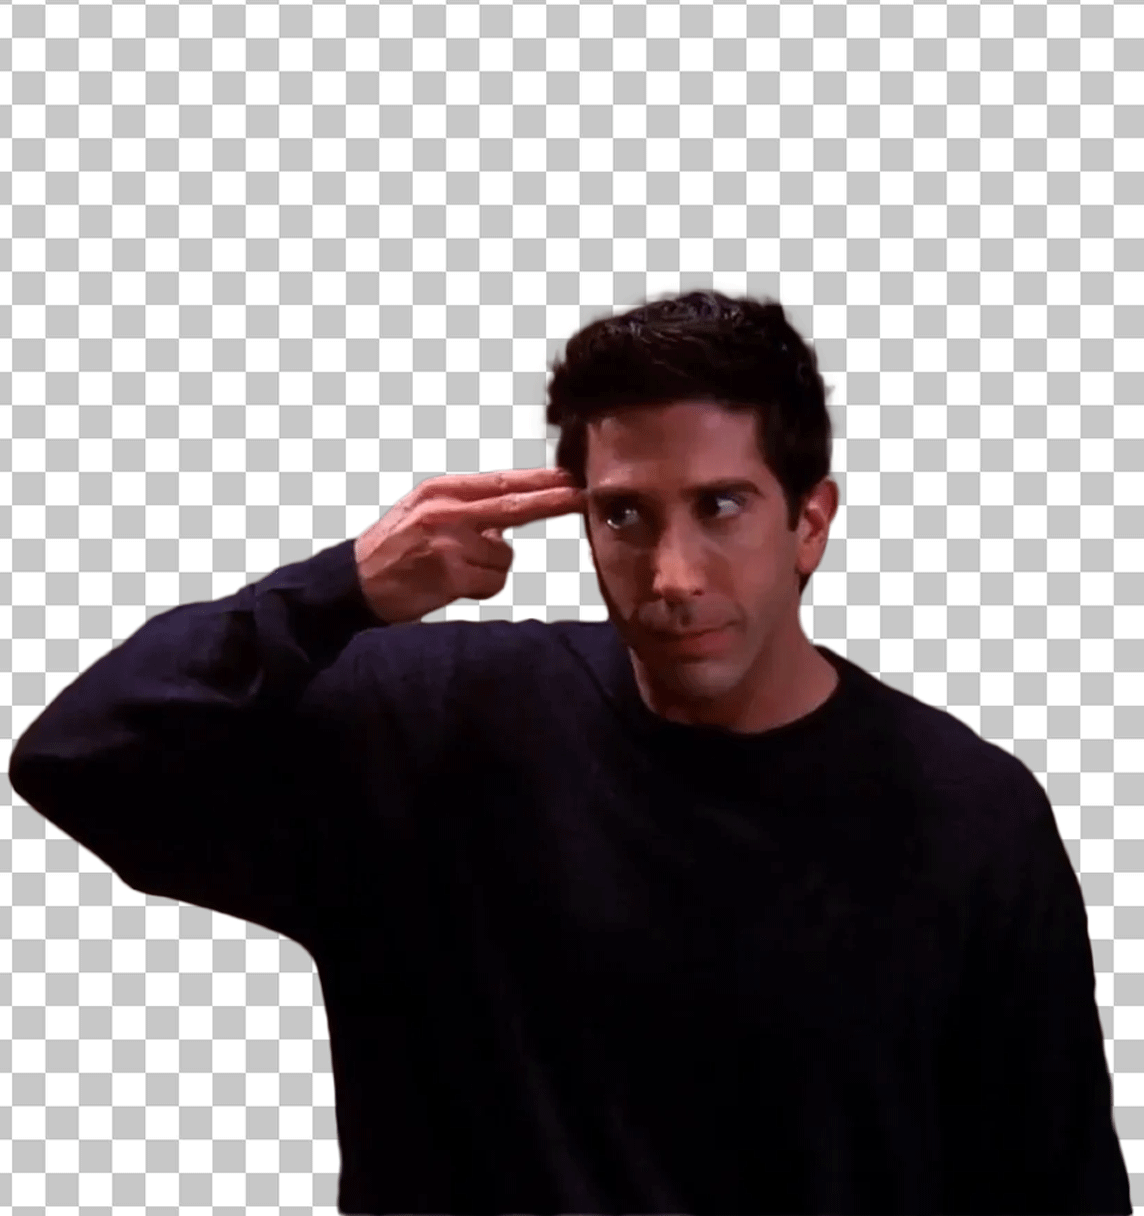 Ross Geller pointing his finger at his forehead PNG Image